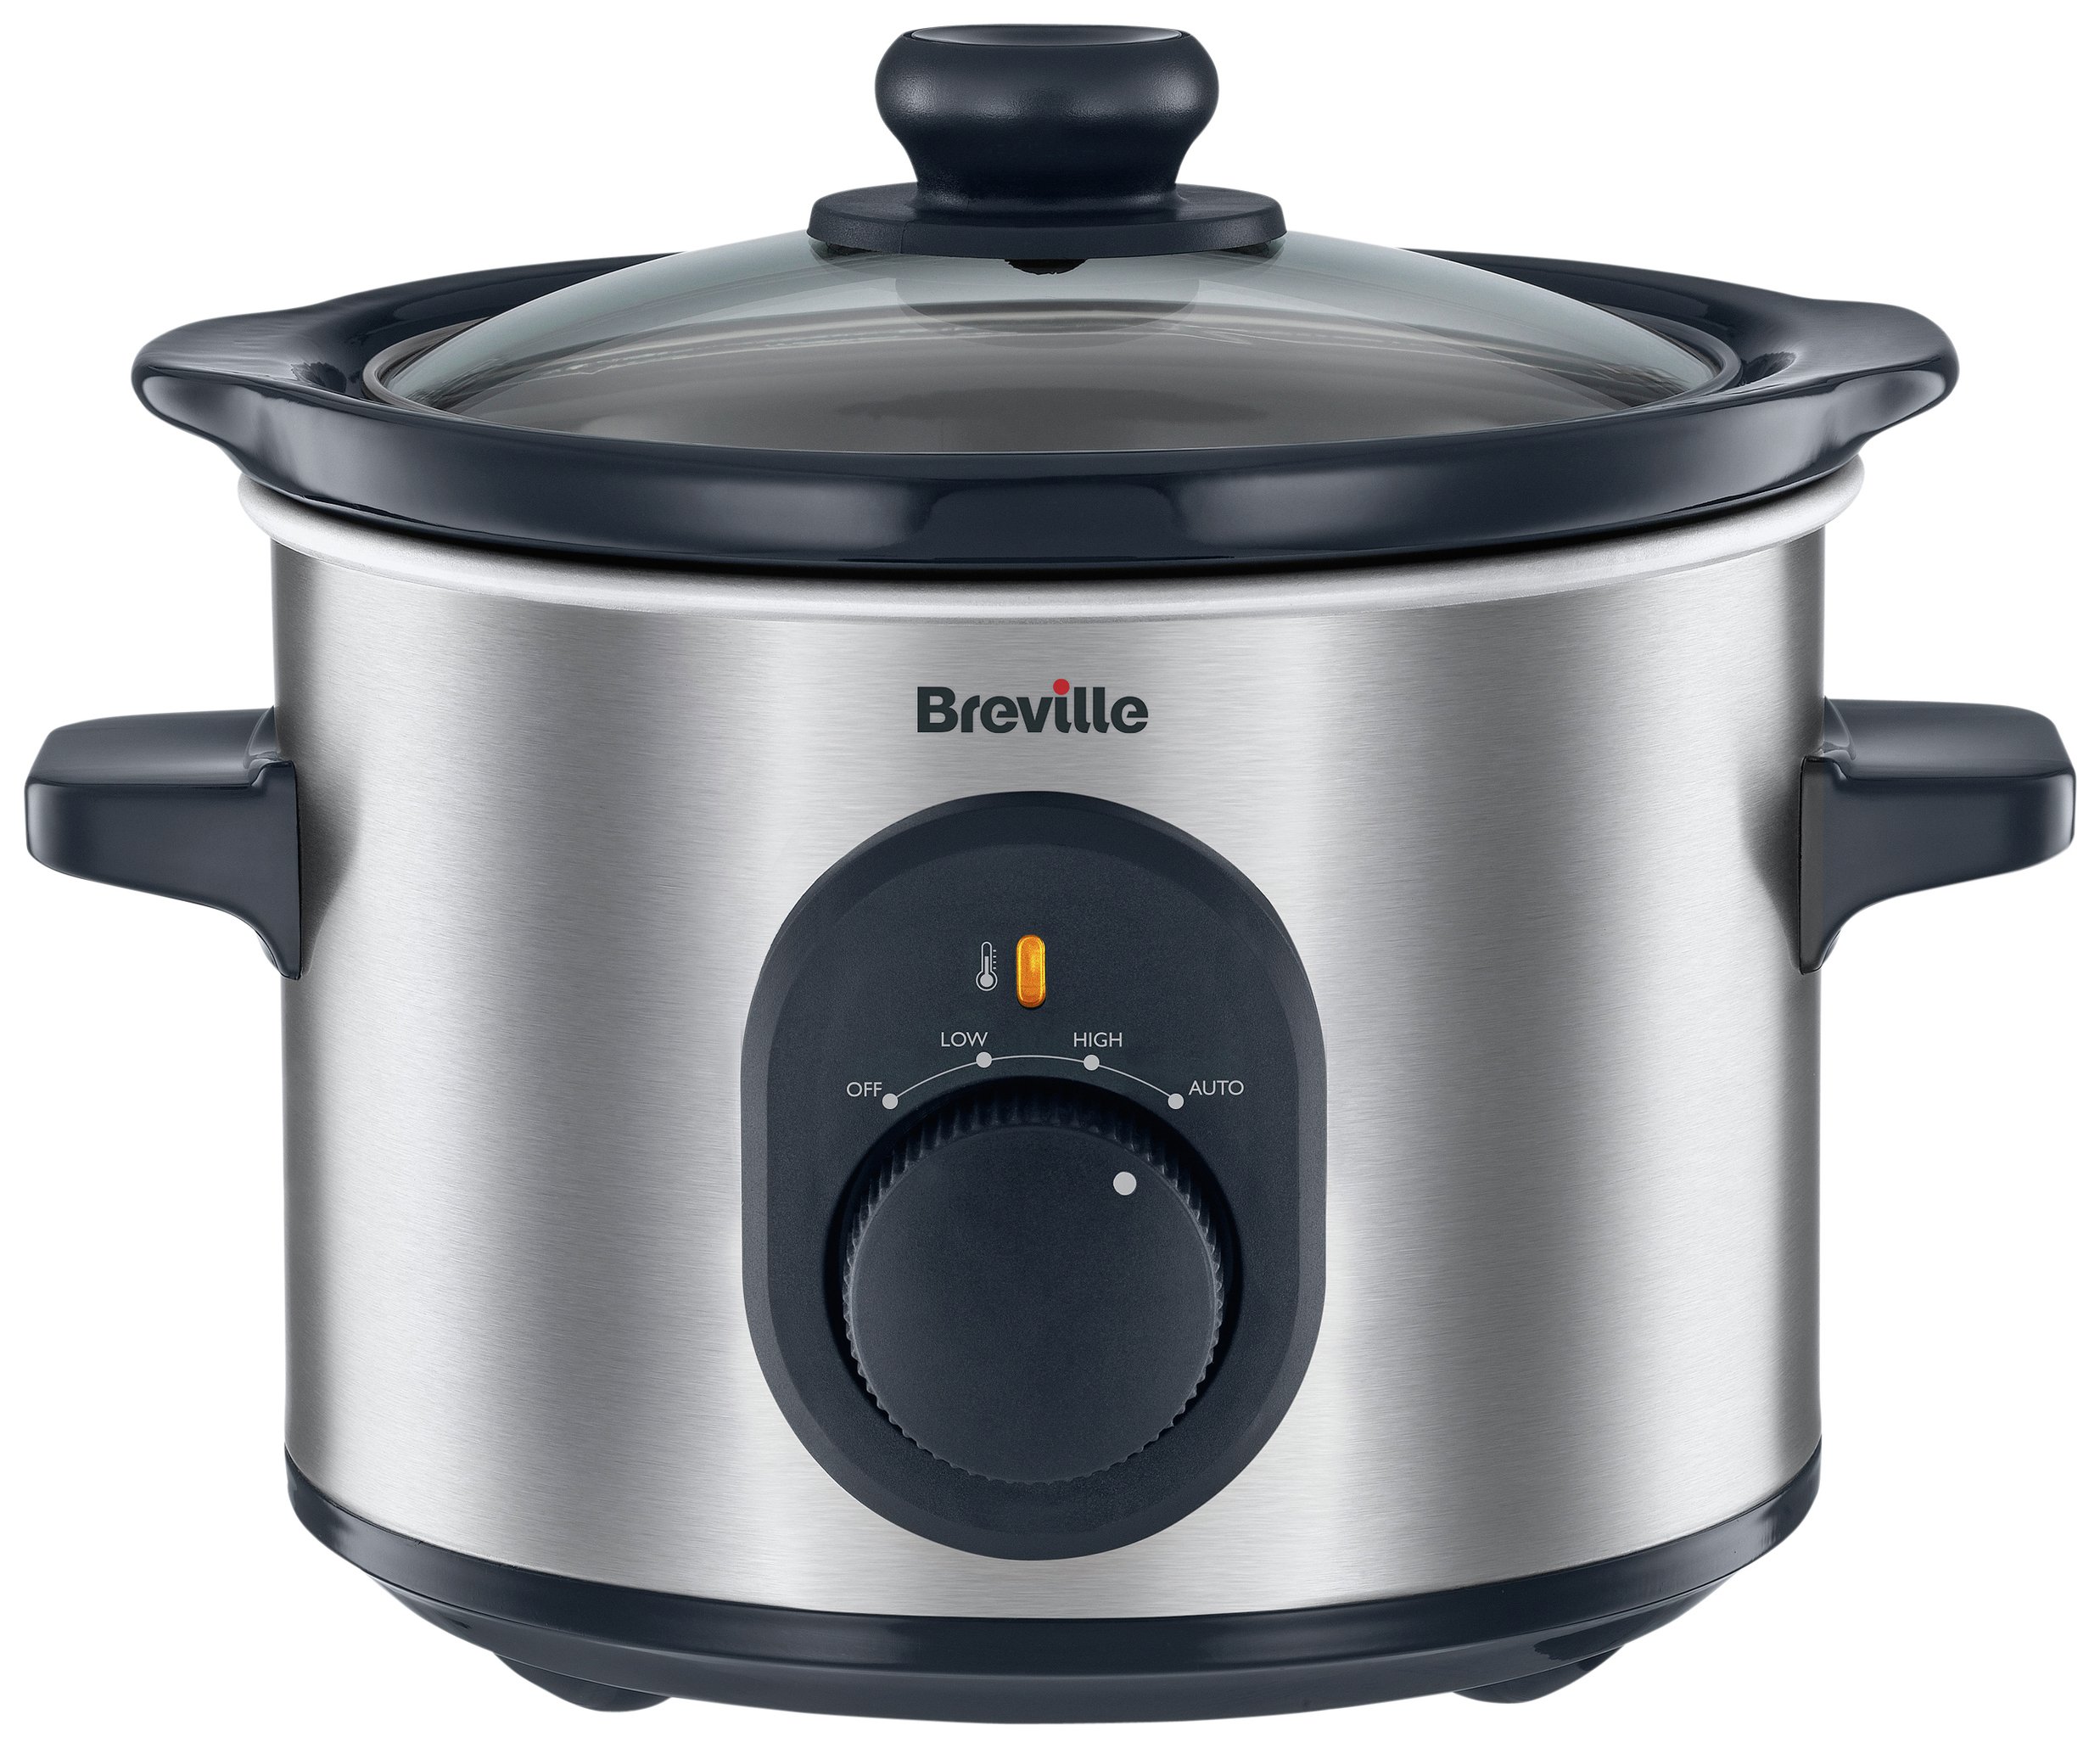 'Breville - 15l Compact Slow Cooker - Stainless Steel